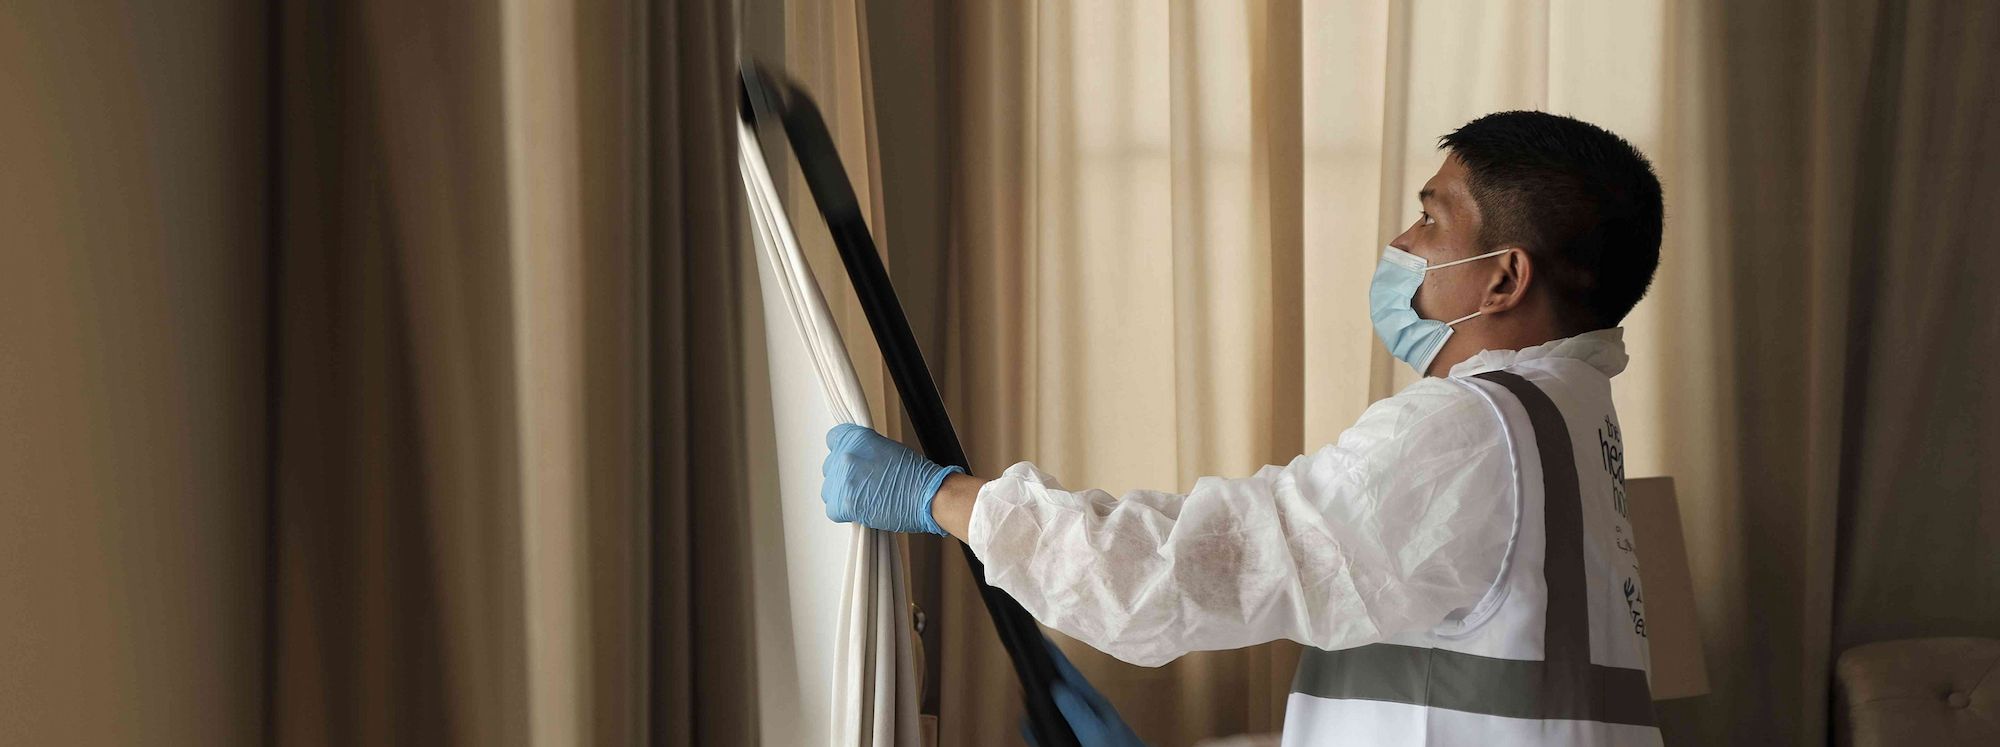 curtain cleaning, blind cleaning